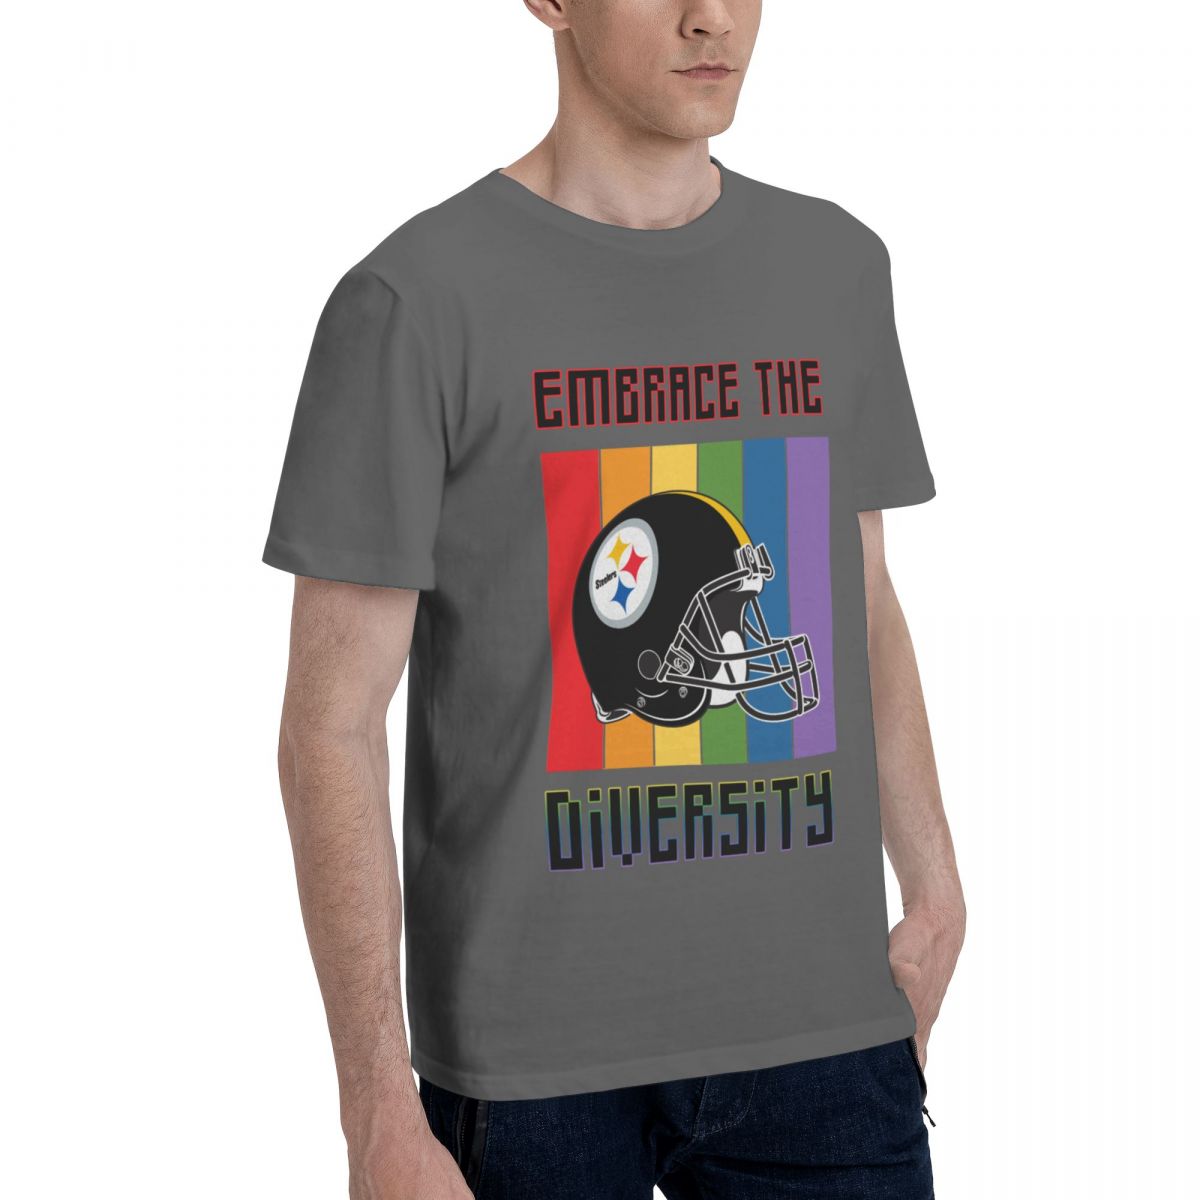 Pittsburgh Steelers Embrace The Diversity Cotton T-Shirt Men's